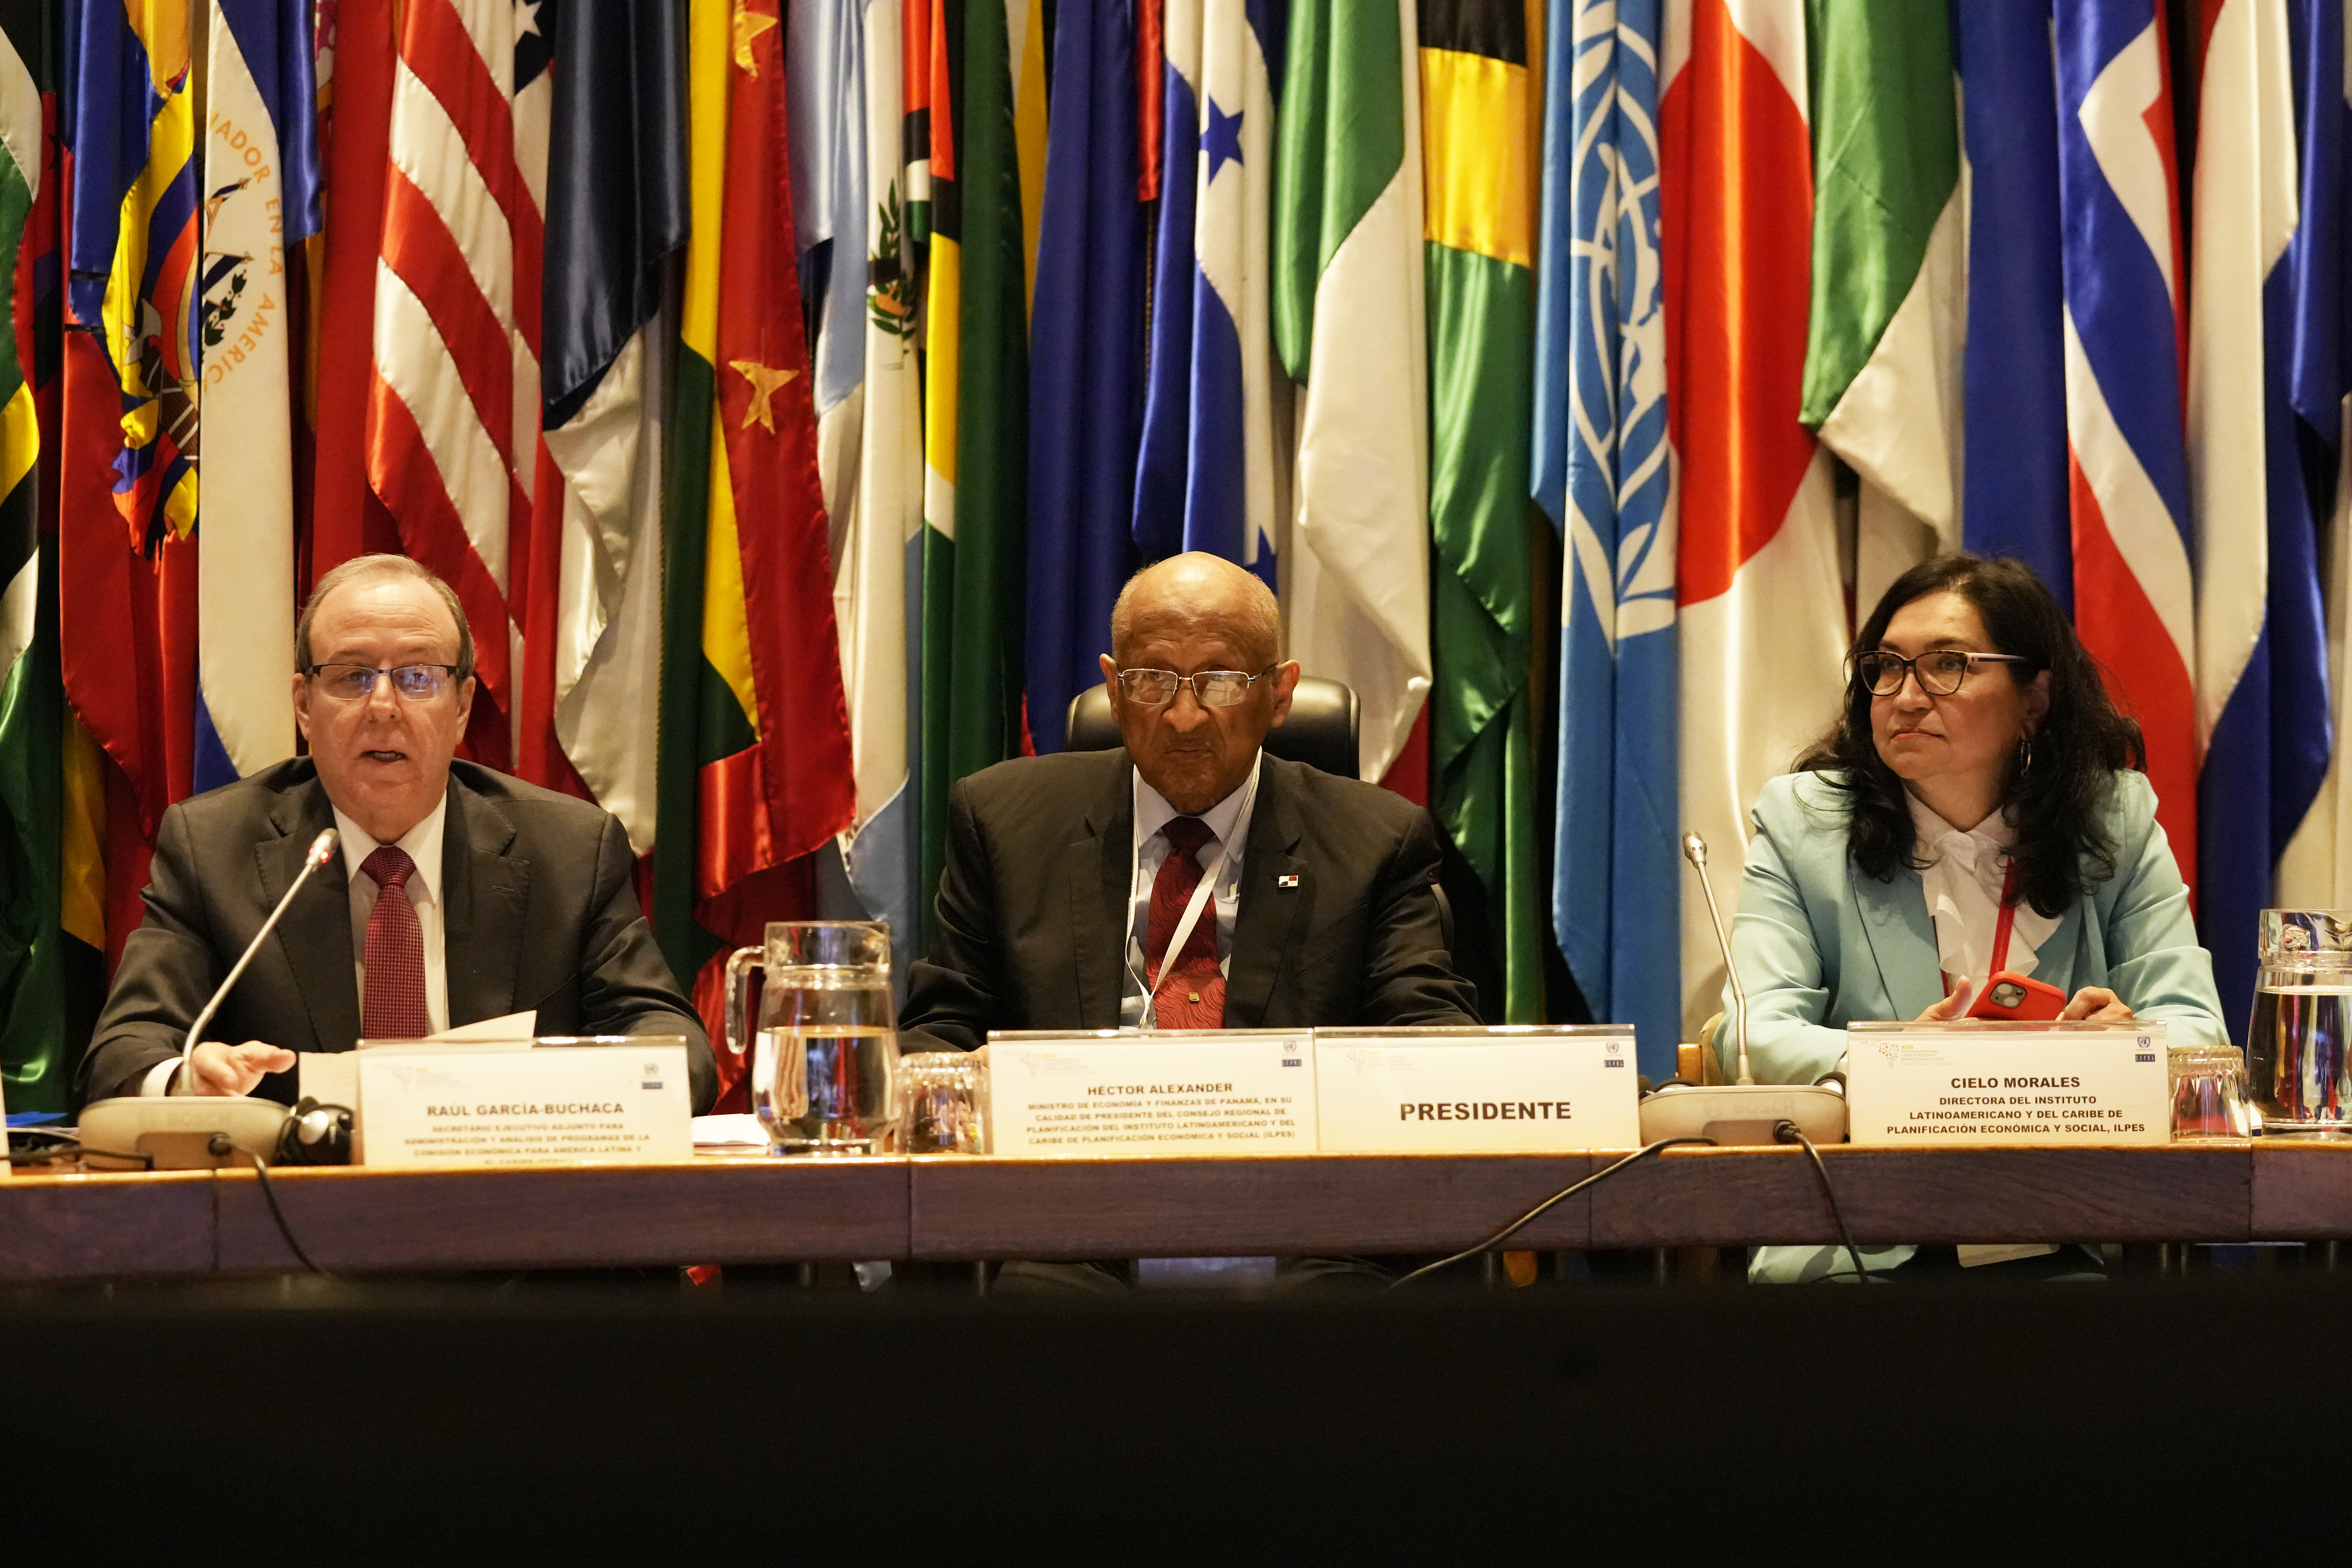 From right to left, Cielo Morales, Director of ILPES; Héctor Alexander, Minister of Economy and Finance of Panama, and Raúl García-Buchaca, Deputy Executive Secretary for Management and Programme Analysis of  ECLAC.